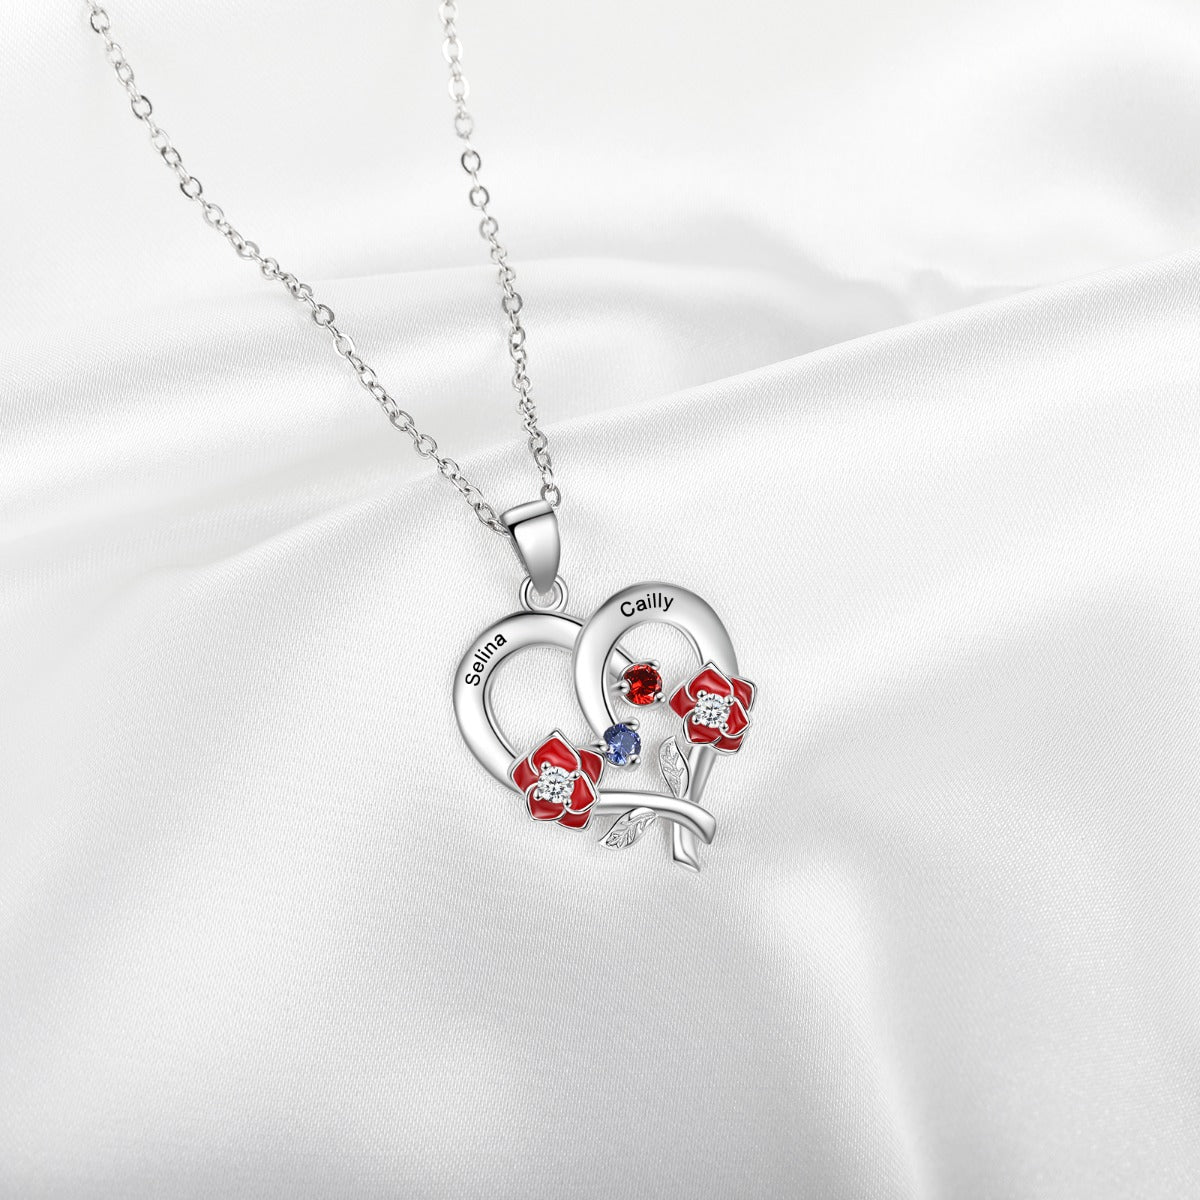 Personalized 925 Silver Custom Heart Rose Flower Necklace